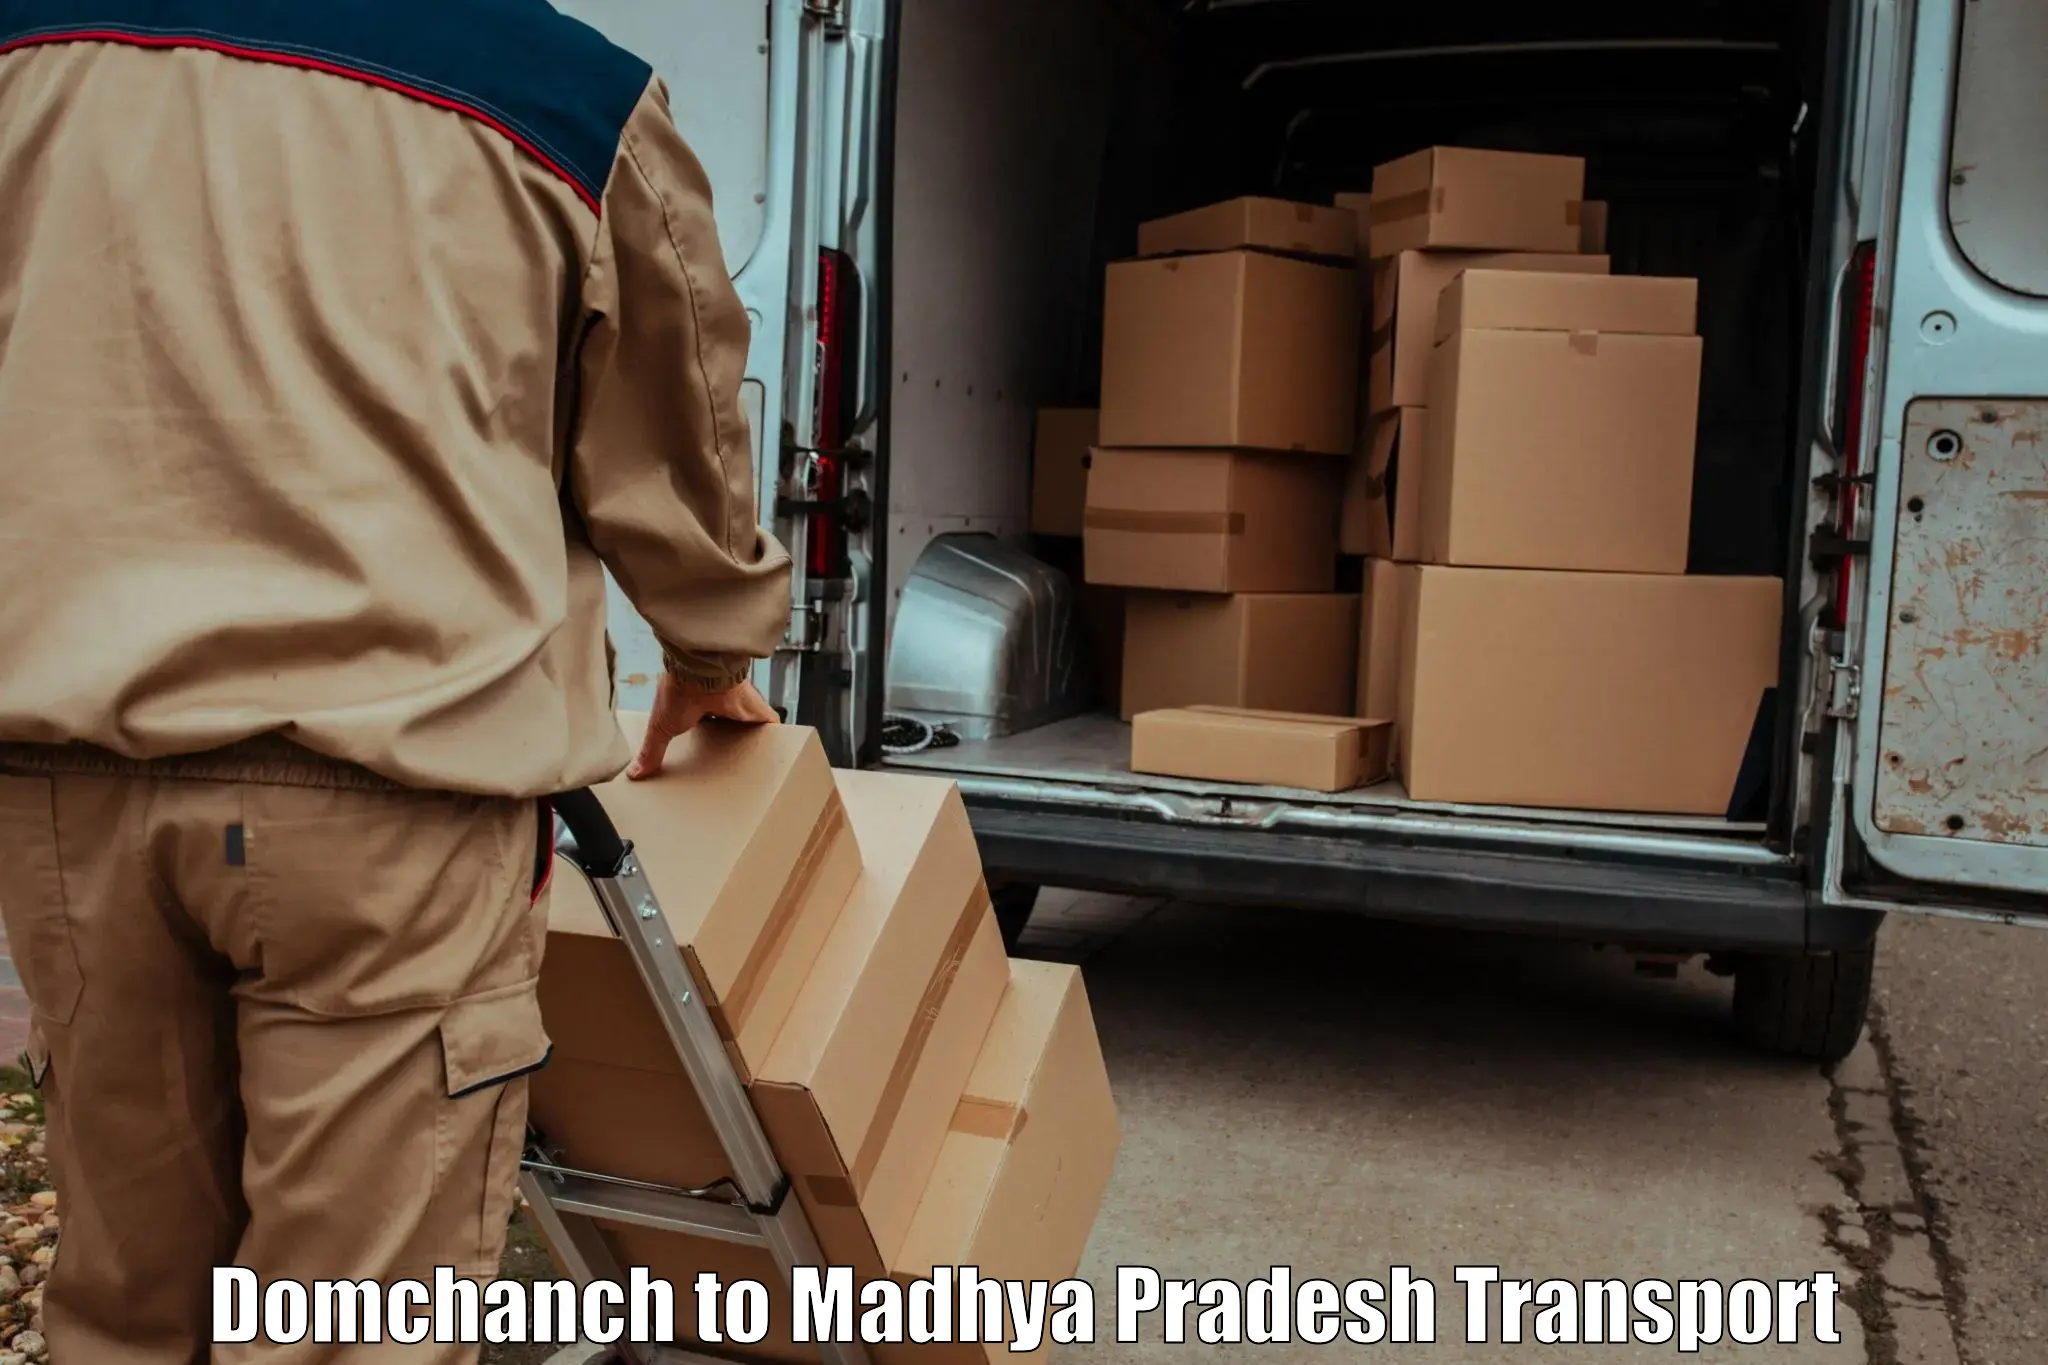 Part load transport service in India Domchanch to Amarpatan